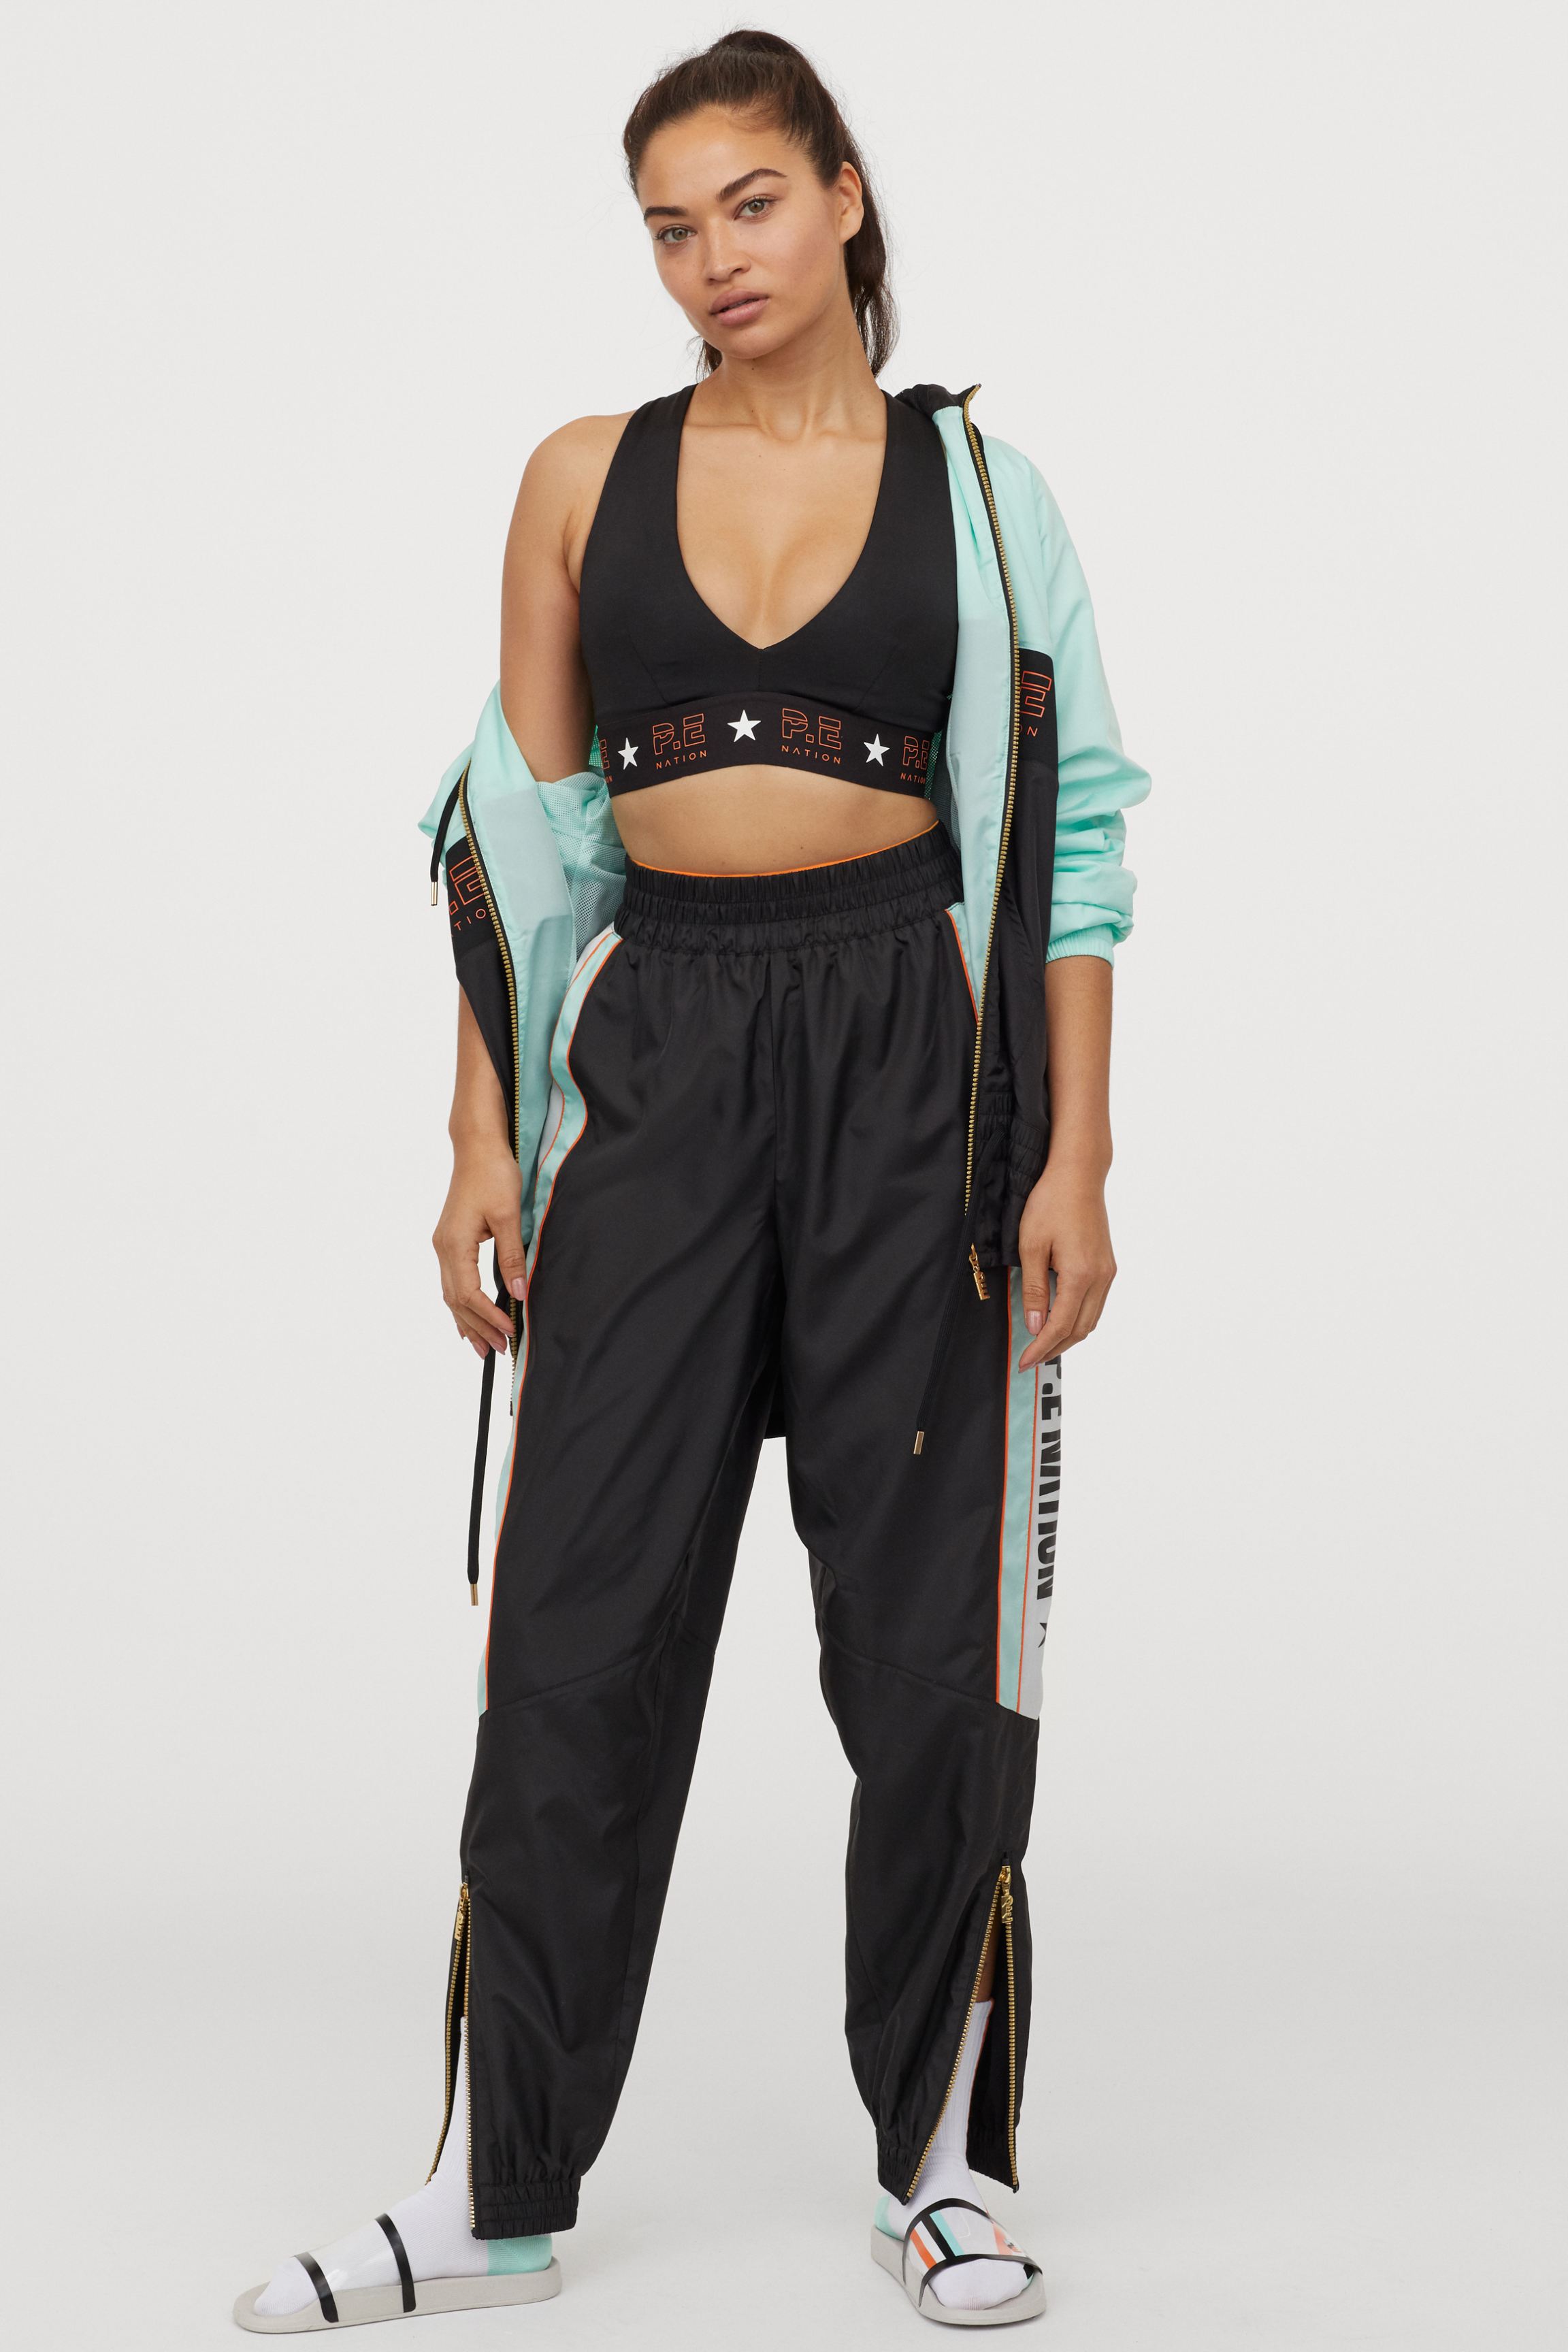 H&M x P.E. Nation Padded Sports Bra and Ankle-Length Scuba Leggings, H&M  Collaborated With P.E. Nation to Make Your Favourite Activewear More  Affordable